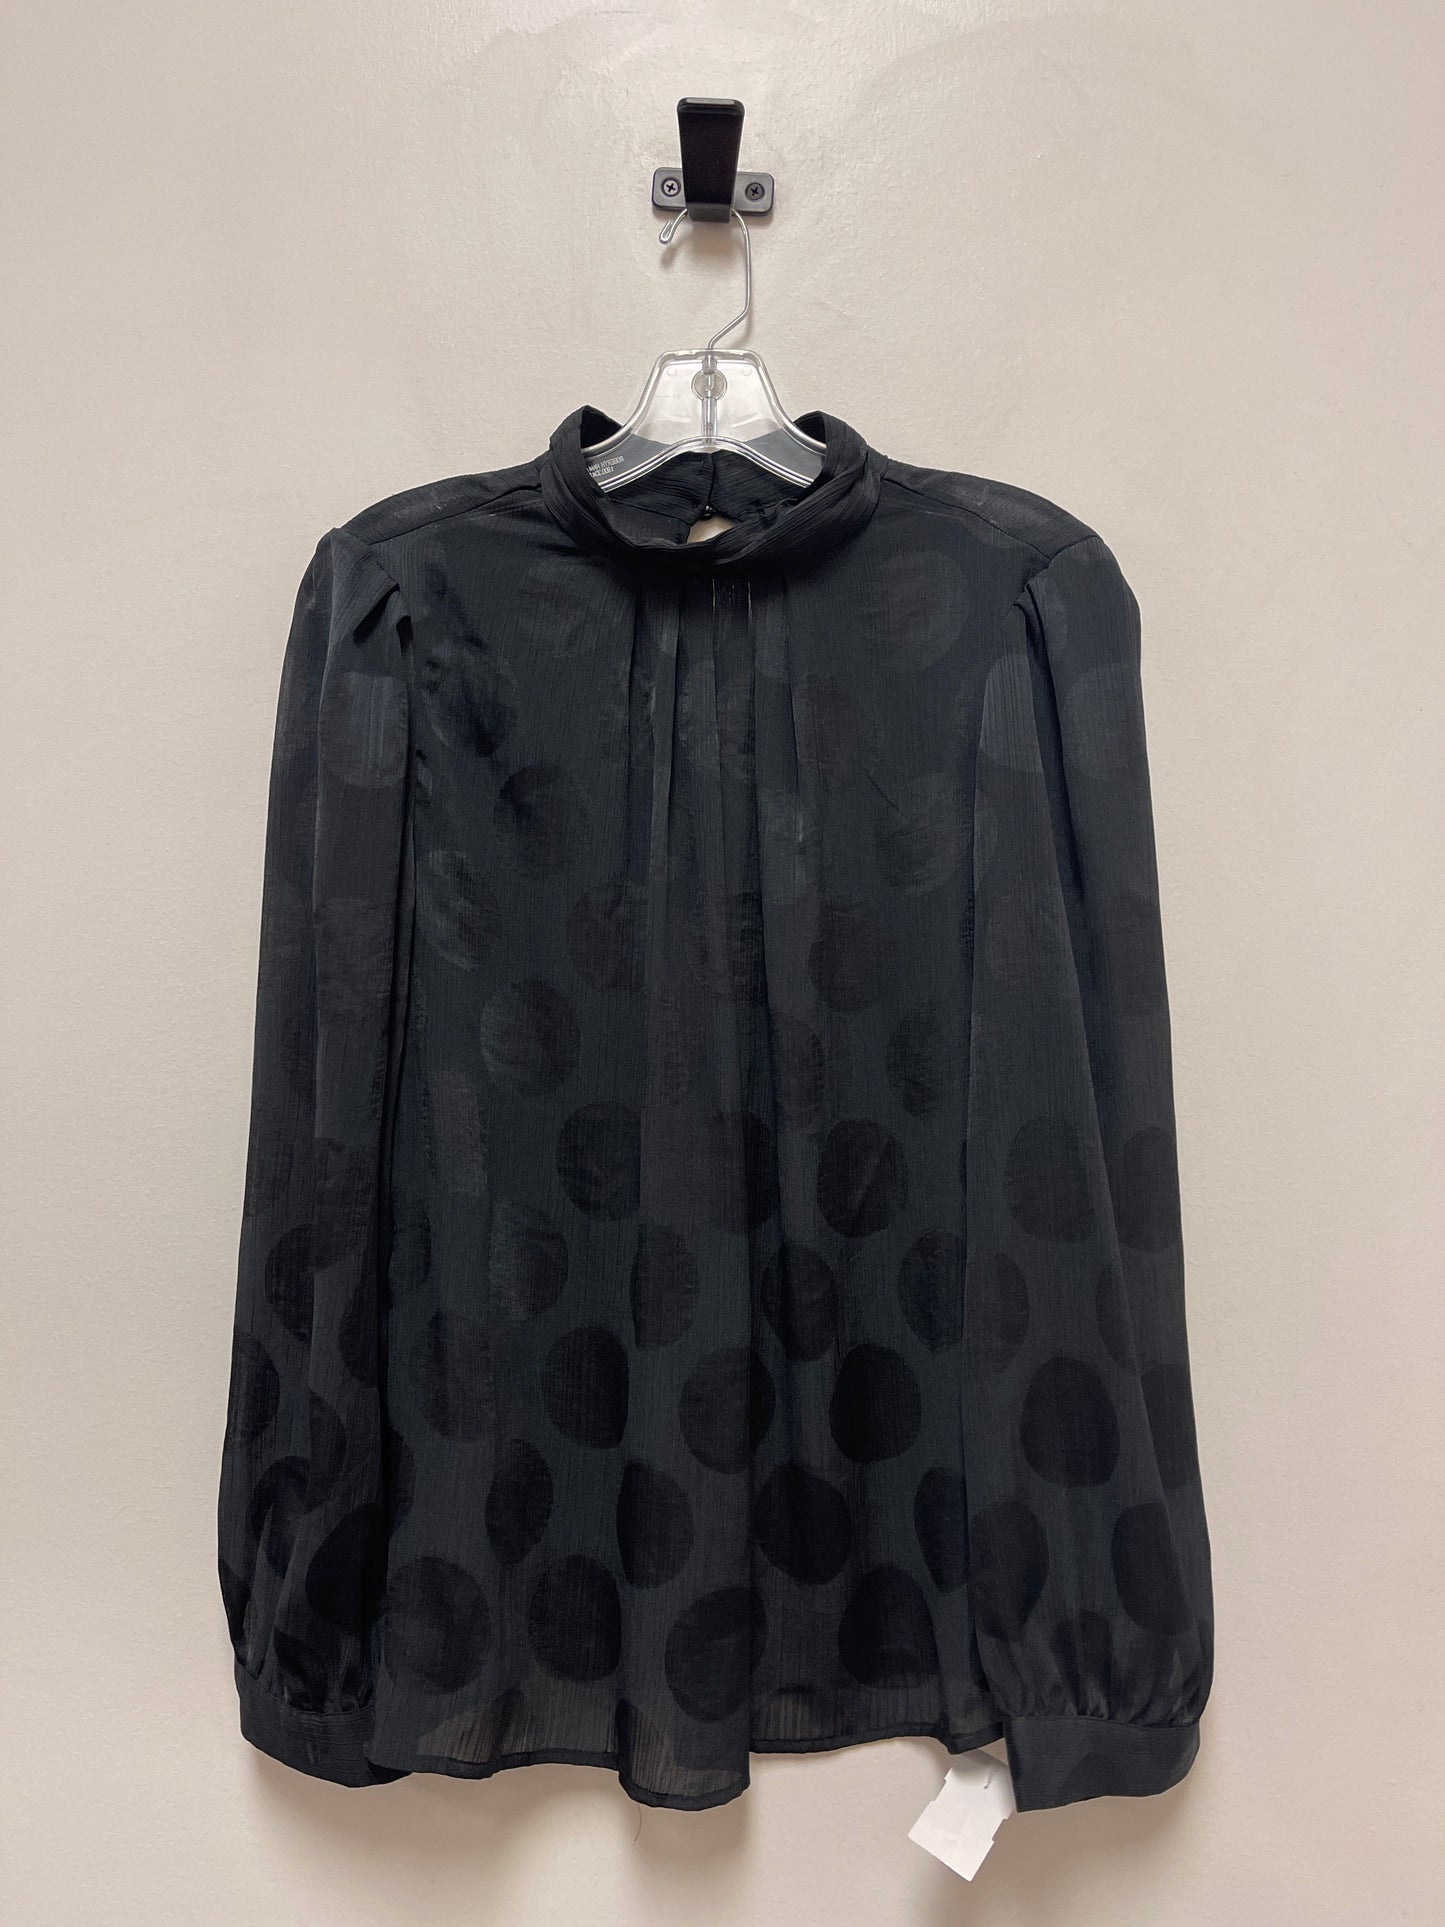 Black Top Long Sleeve Who What Wear, Size M